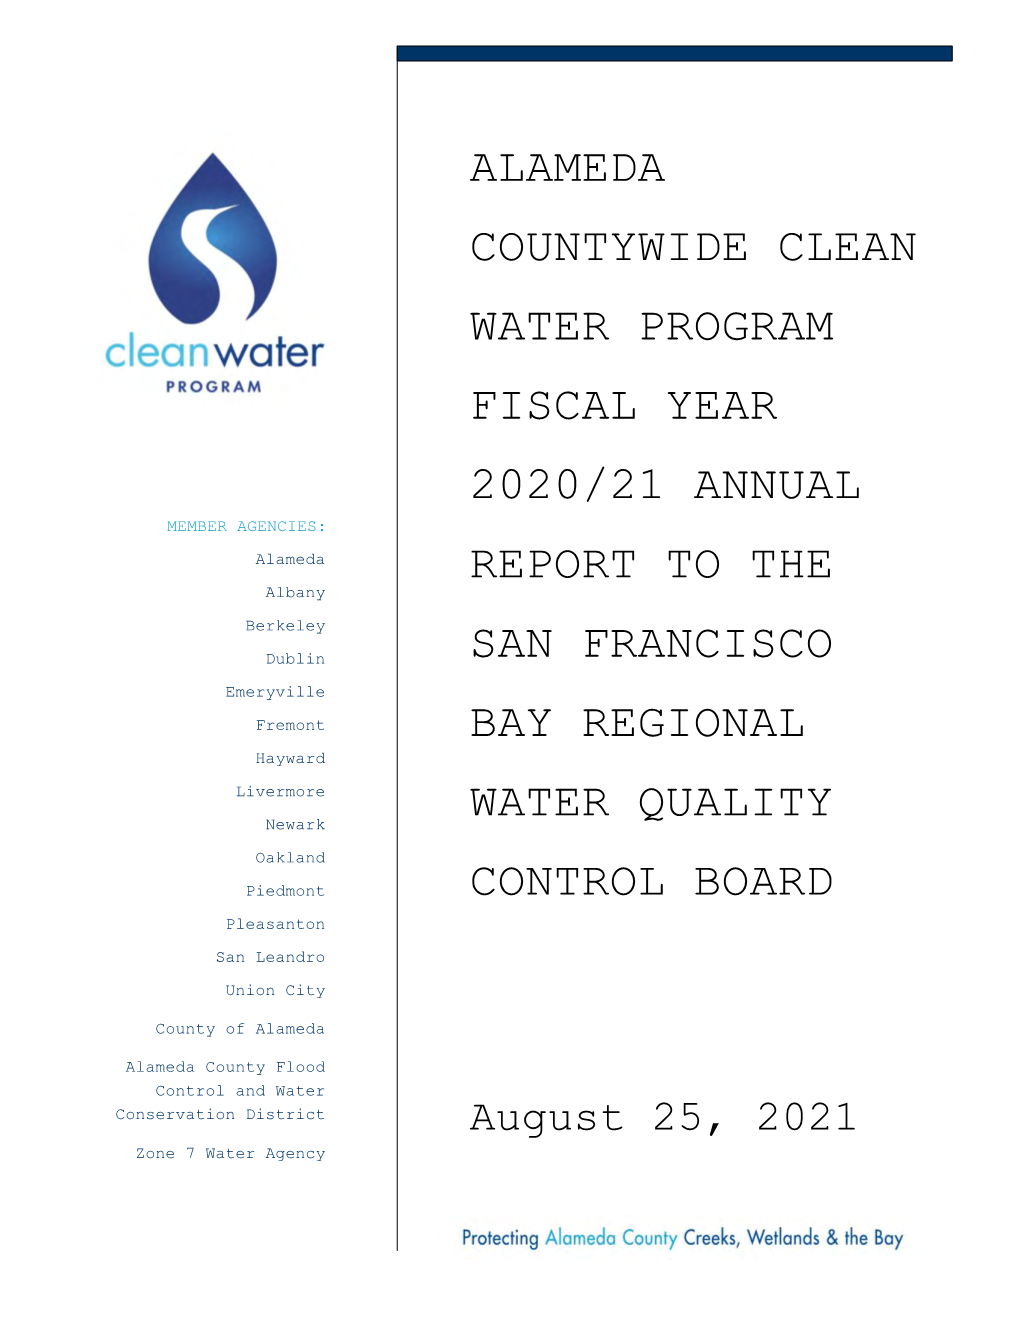 Alameda Countywide Clean Water Program Fiscal Year 2020/21 Annual Report to the San Francisco Bay Regional Water Quality Control